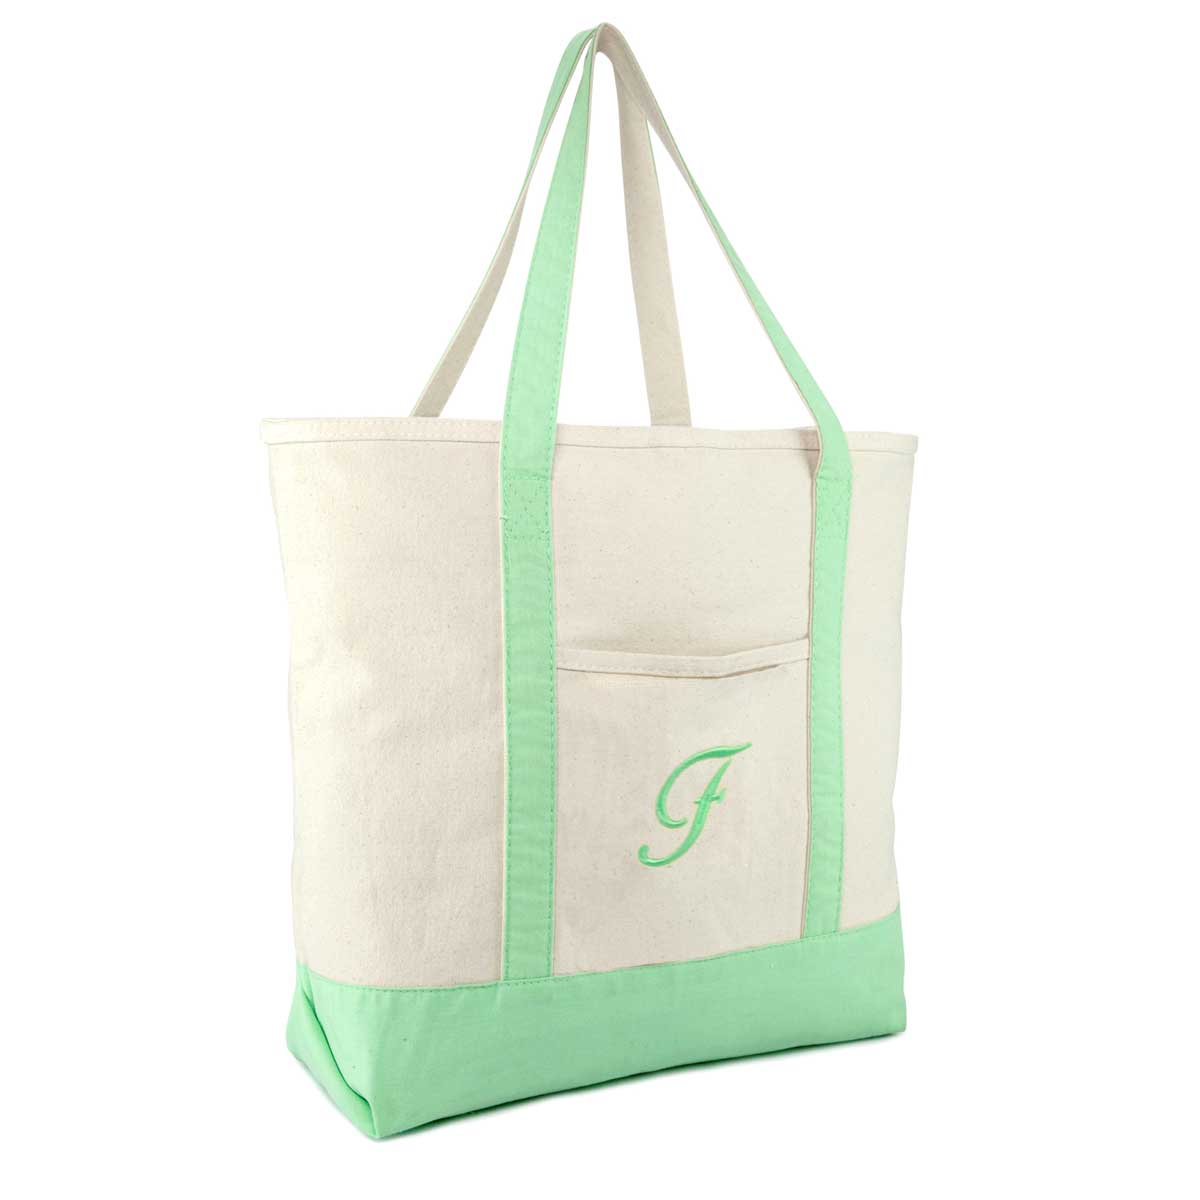 Dalix Personalized Shopping Tote Bag Monogram Mint Green Initial Zippered Letter A-Z